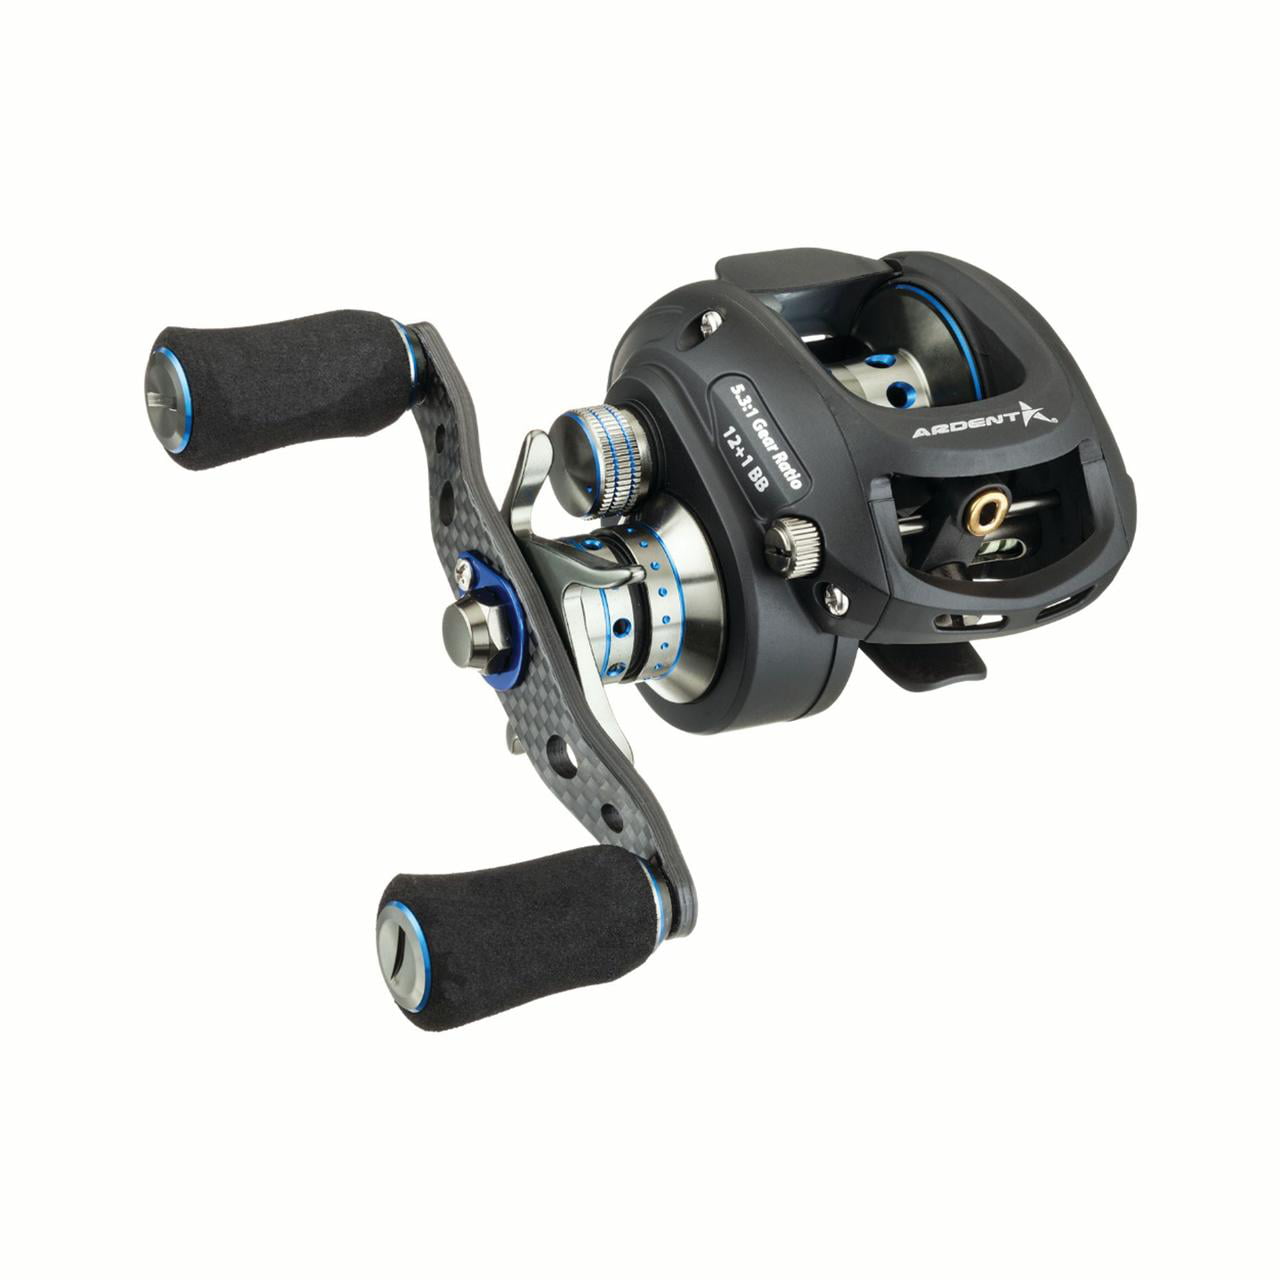 Details about   Light & Strong Left Hand Operation Apex Elite Fishing Reel with 6.5:1 Gear Ratio 